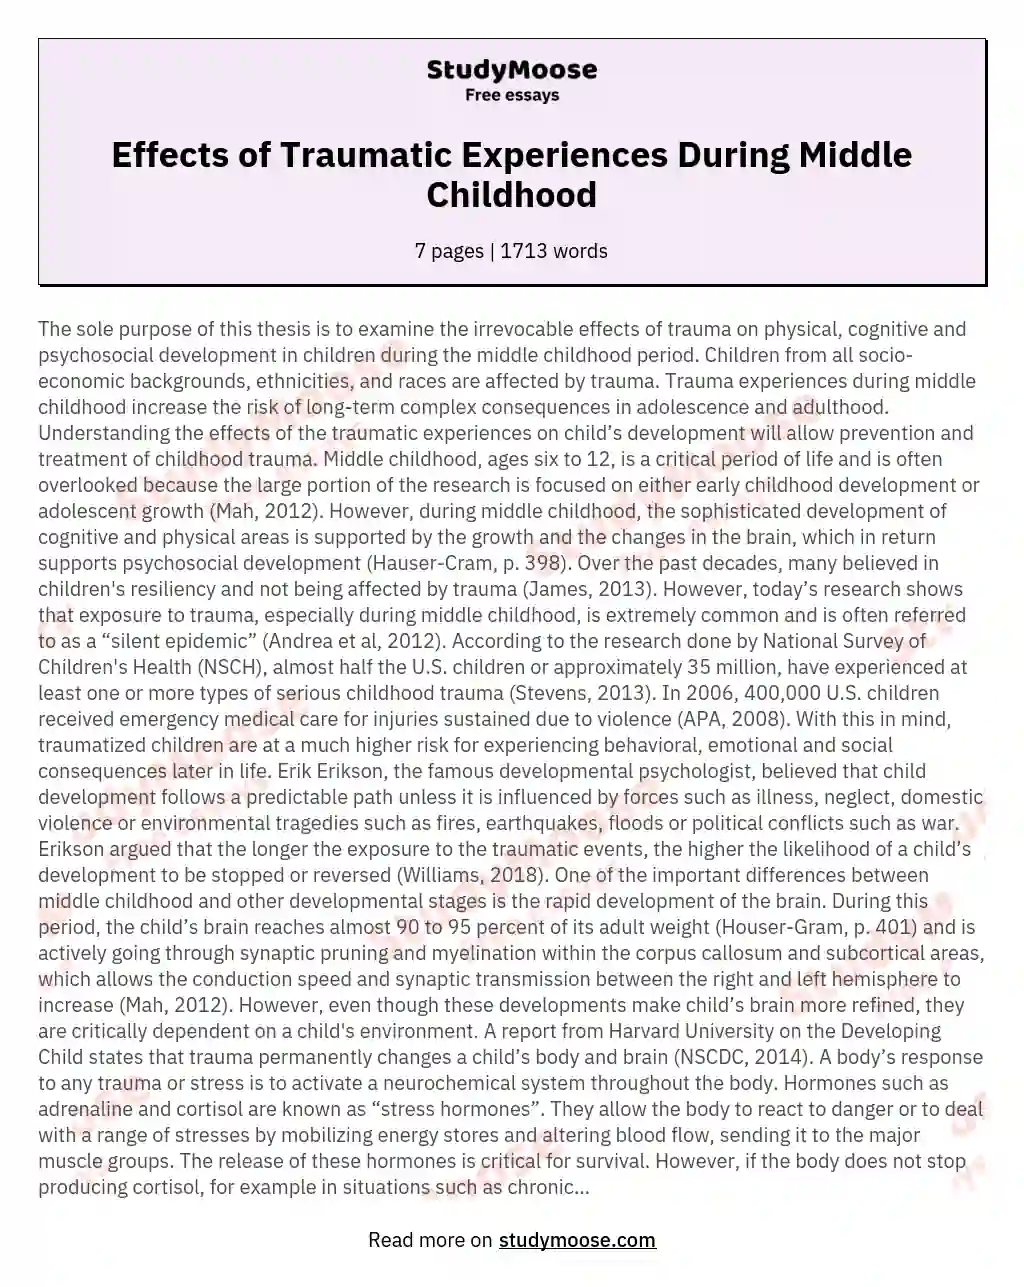 Effects of Traumatic Experiences During Middle Childhood essay